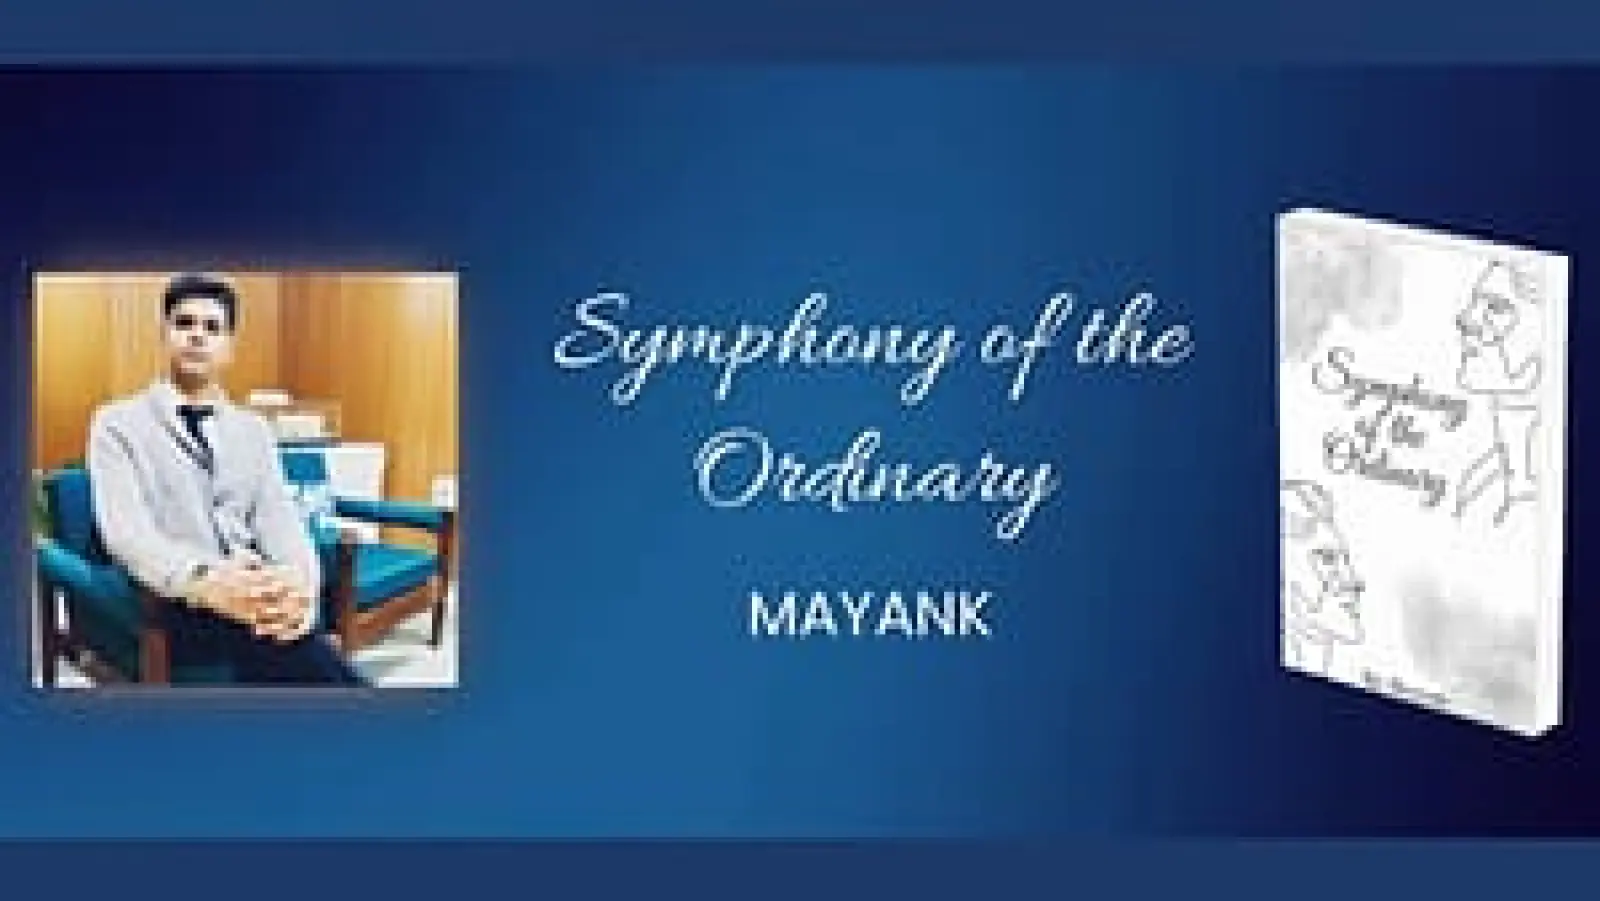 Mayank’s Inspirations and Insights Behind Symphony of the Ordinary